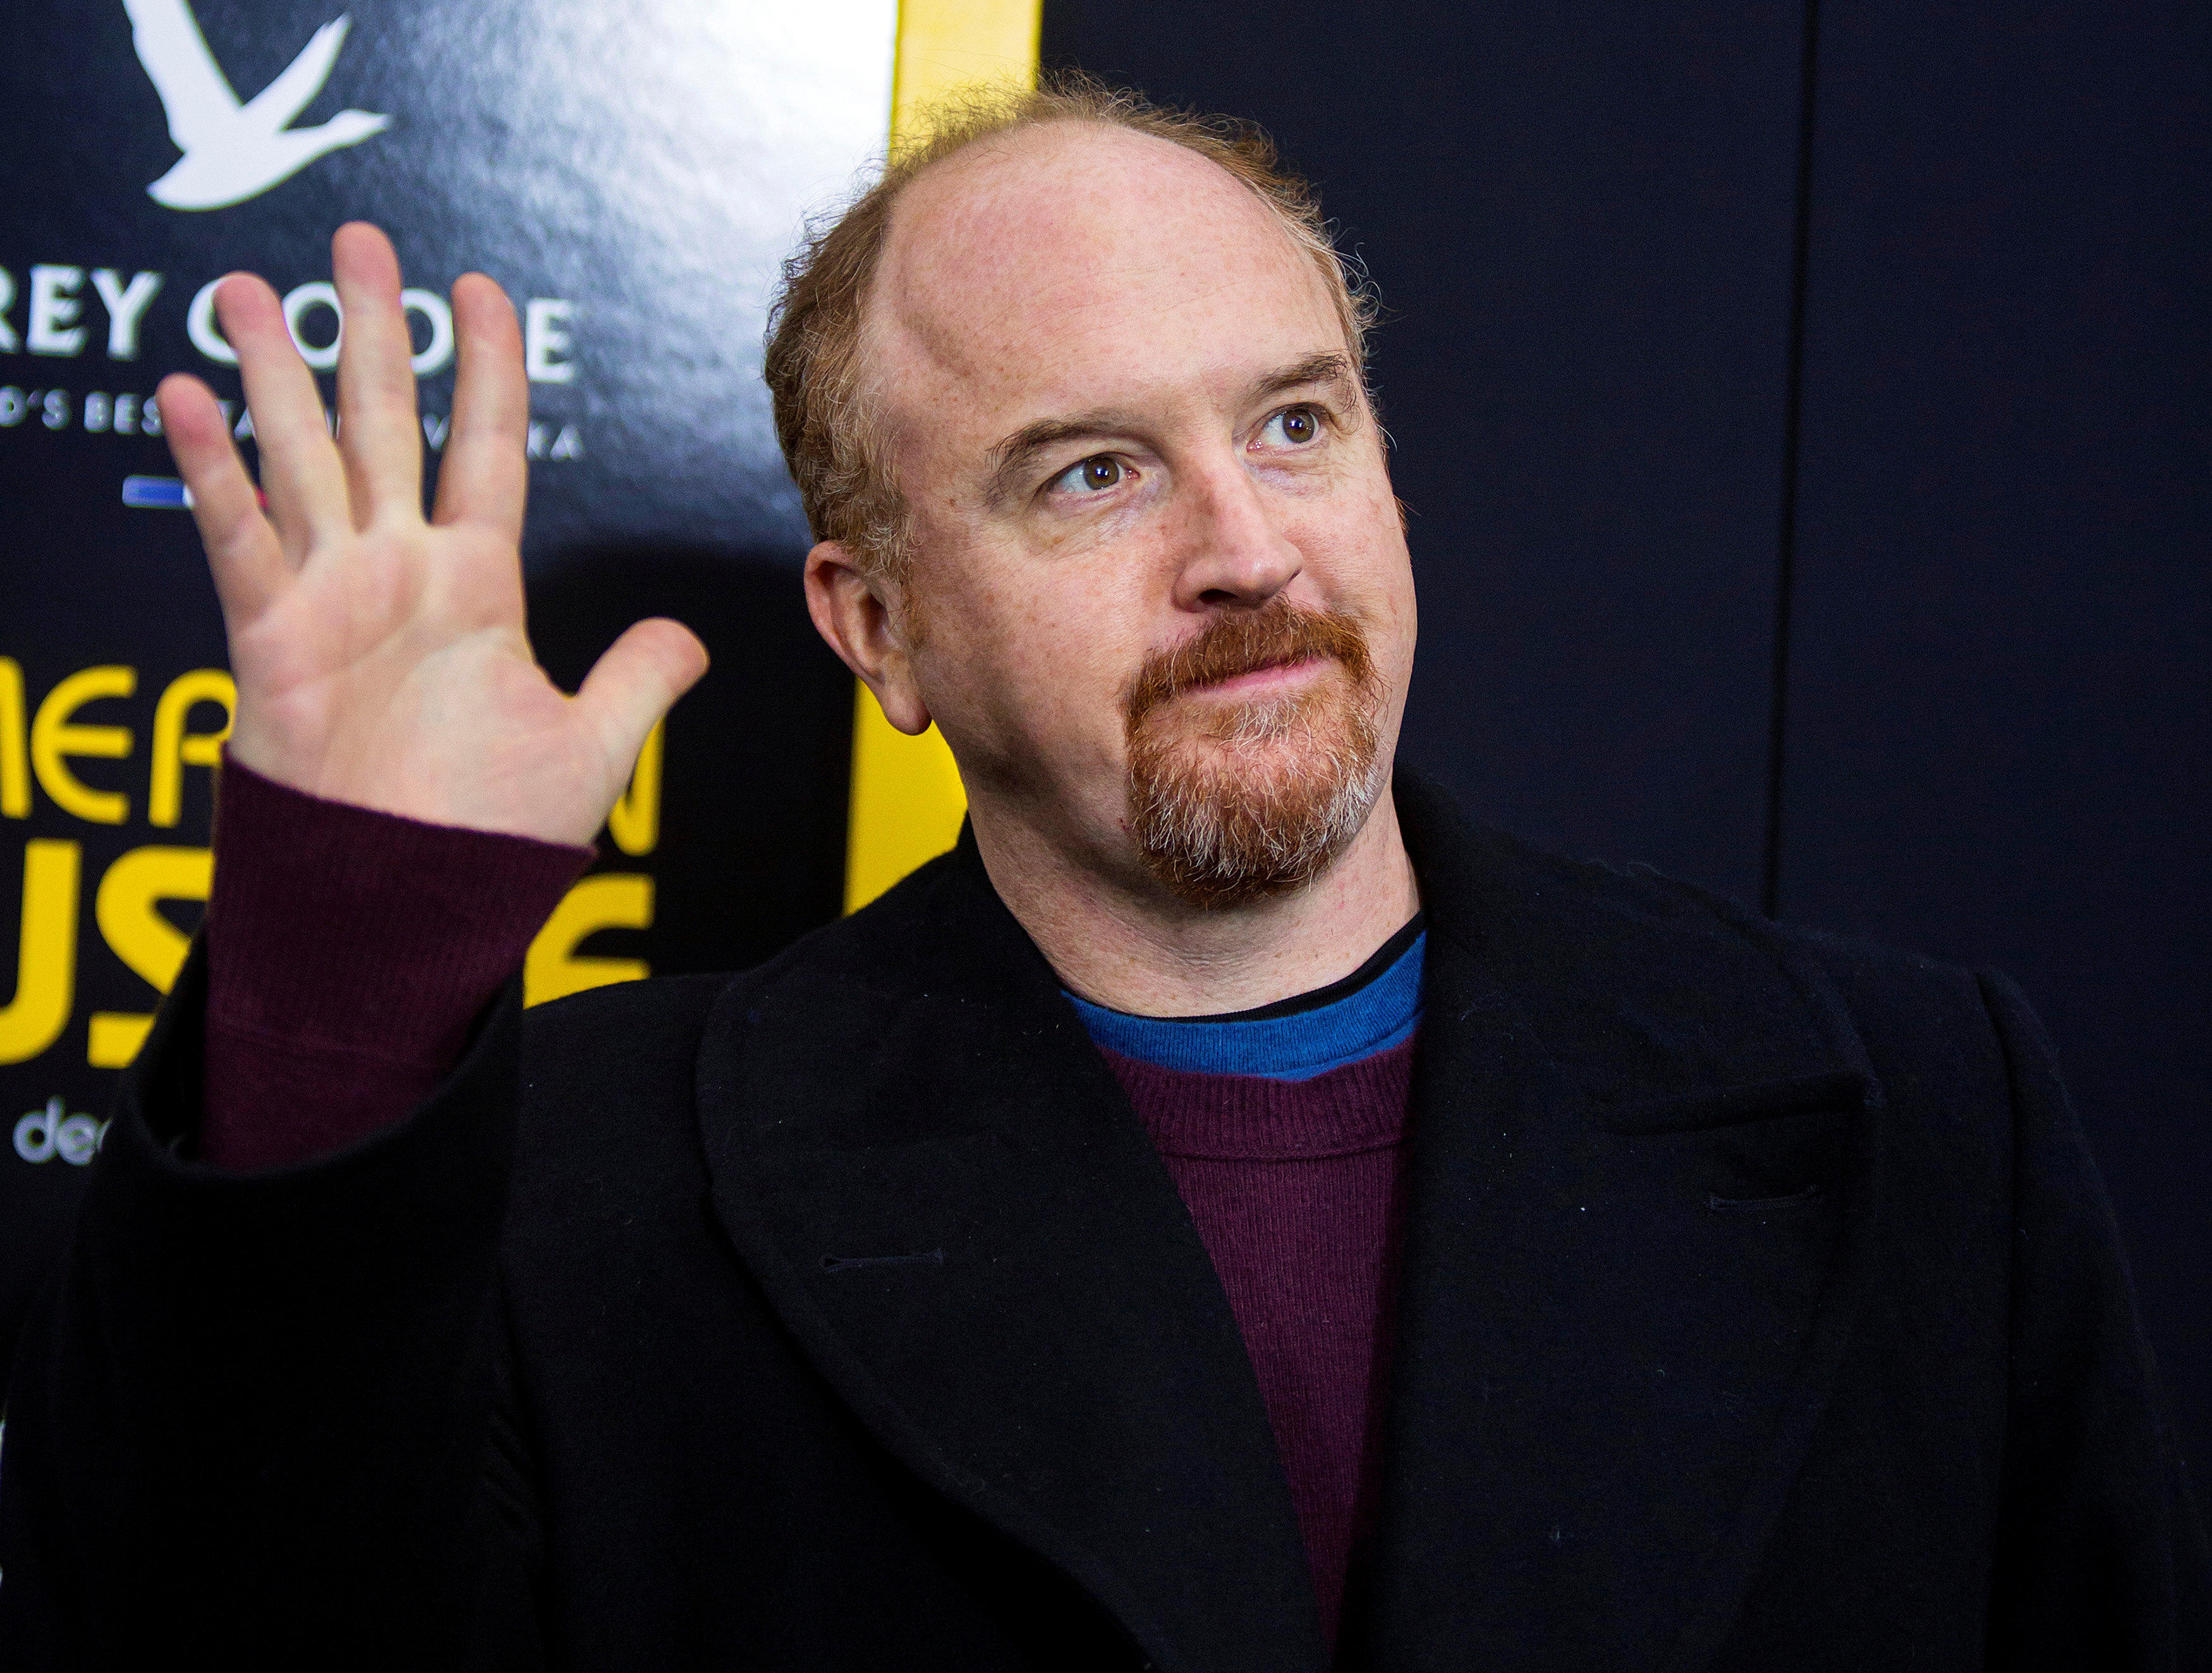 Louis C.K. says in statement sexual misconduct stories "are true" CBS